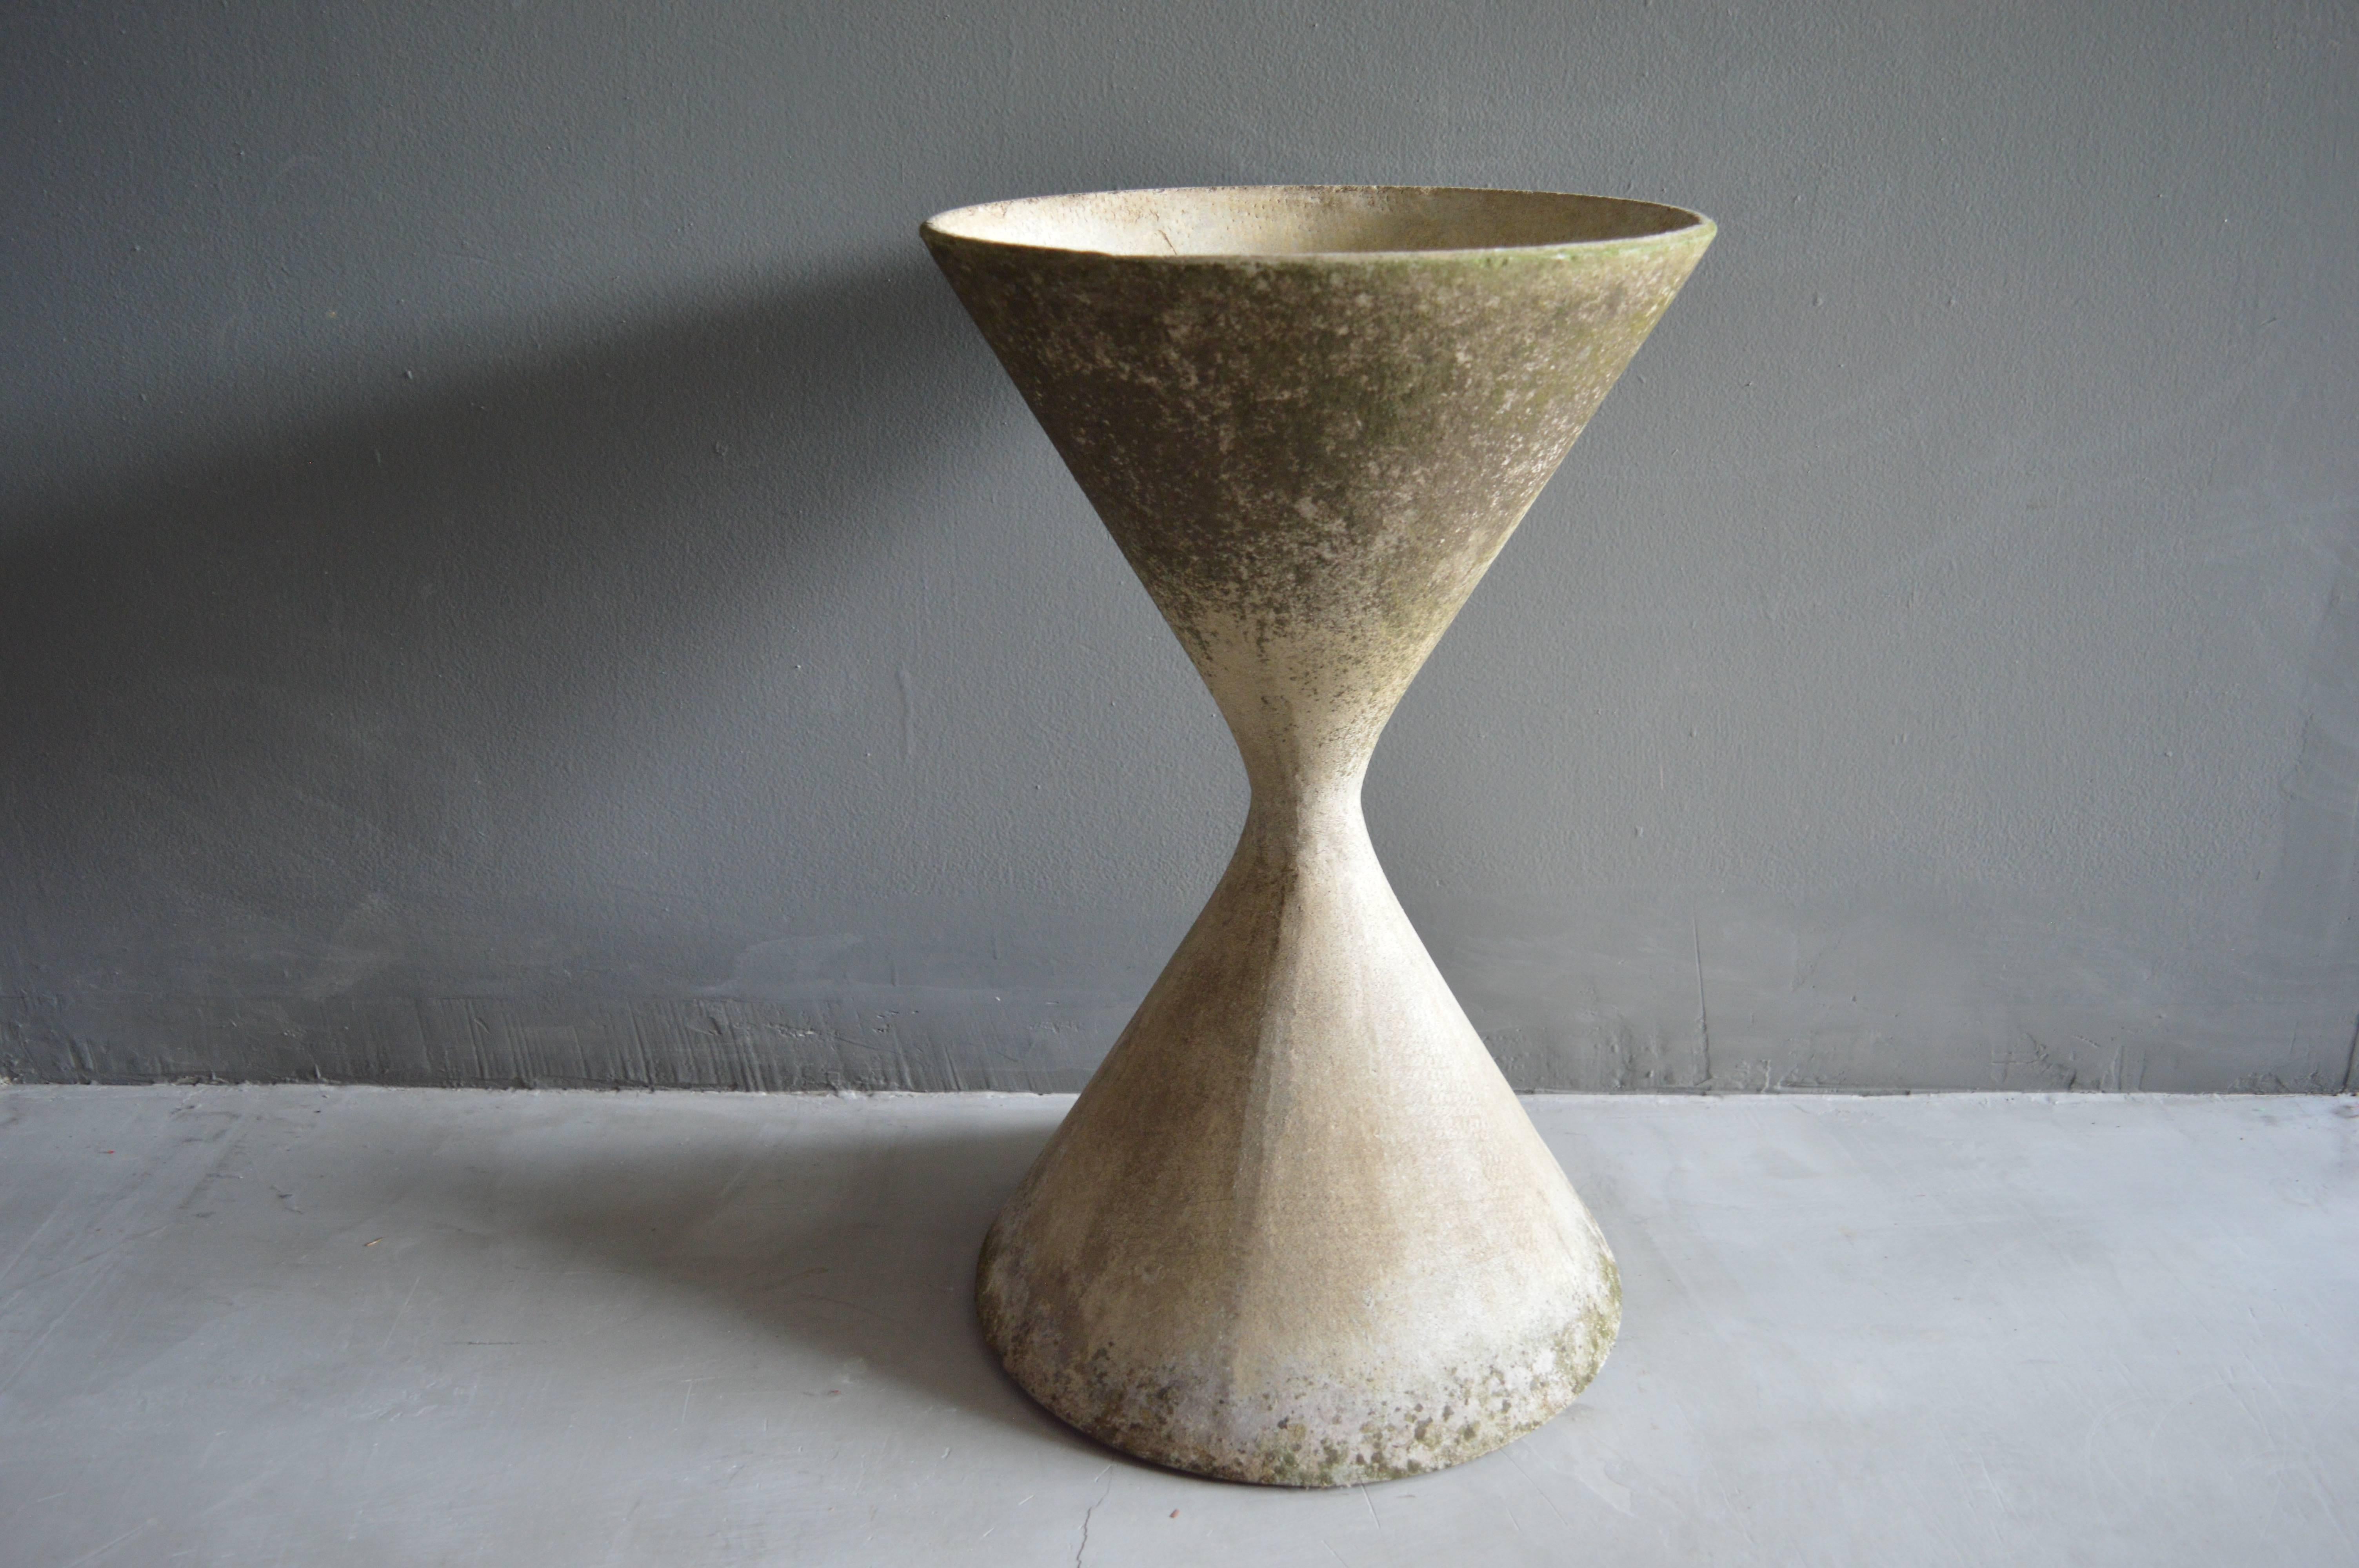 Classic hourglass planter by Swiss designer Willy Guhl for Eternit. Gorgeous patina to cement. Excellent vintage condition. Multiple pots available in this size.

Over a 150 Willy Guhl pieces available in our other listings.